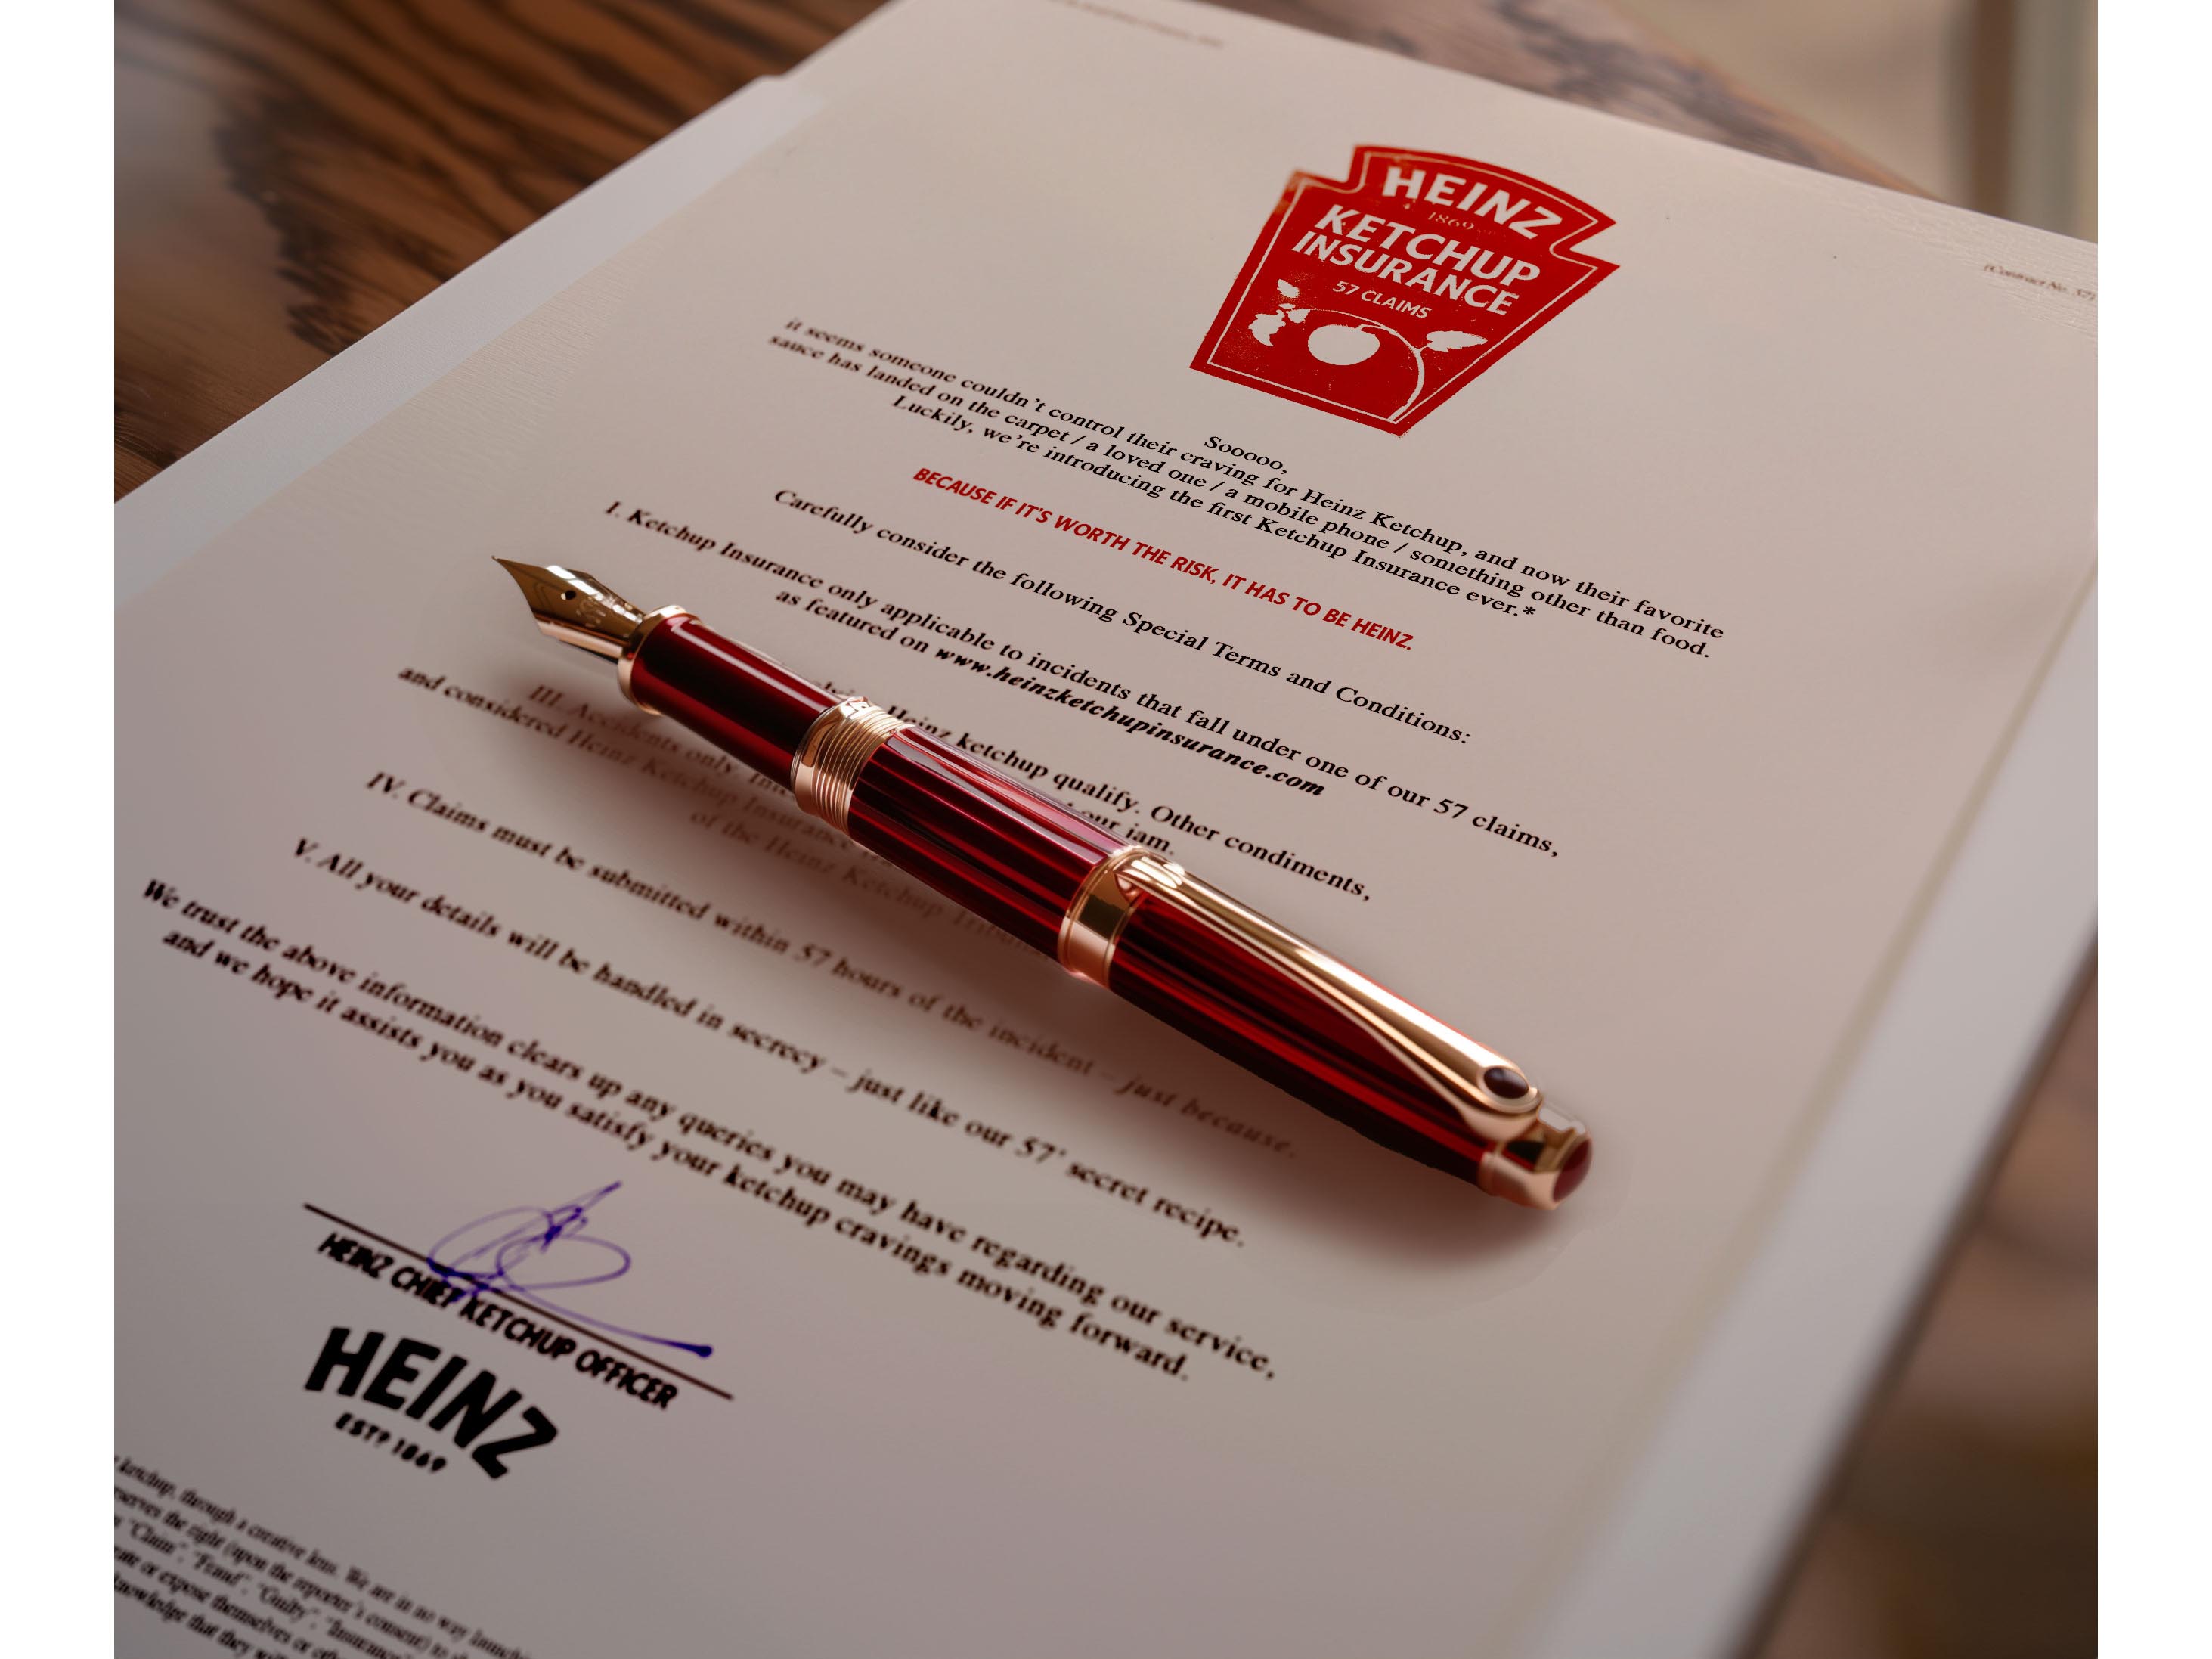 World’s first ketchup insurance policy drives sales for Heinz across the UAE